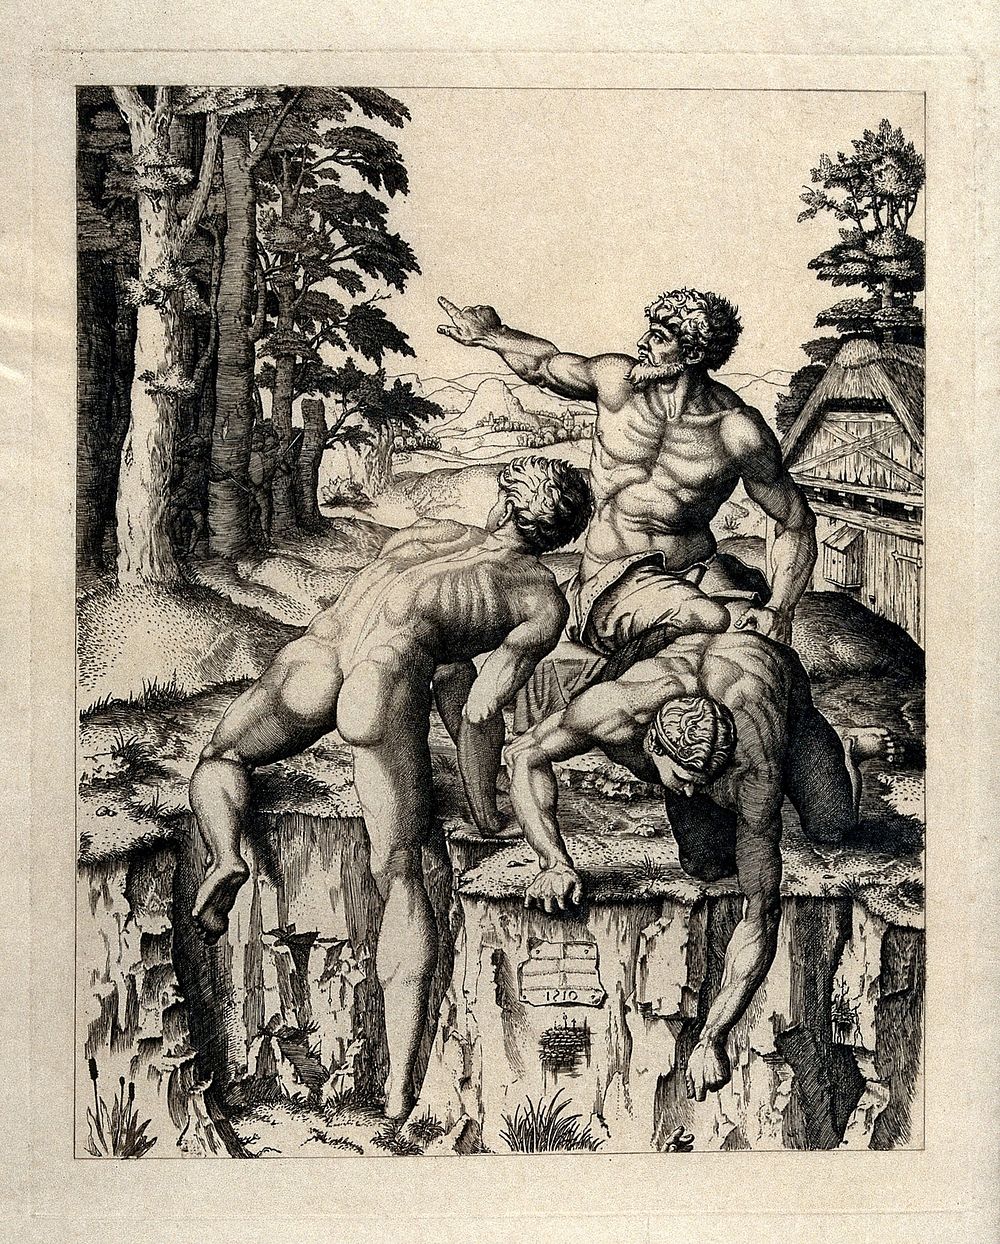 Bathers on the edge of a river bed, with hunters emerging from the forest on the left. Engraving after M. Raimondi, 1510.